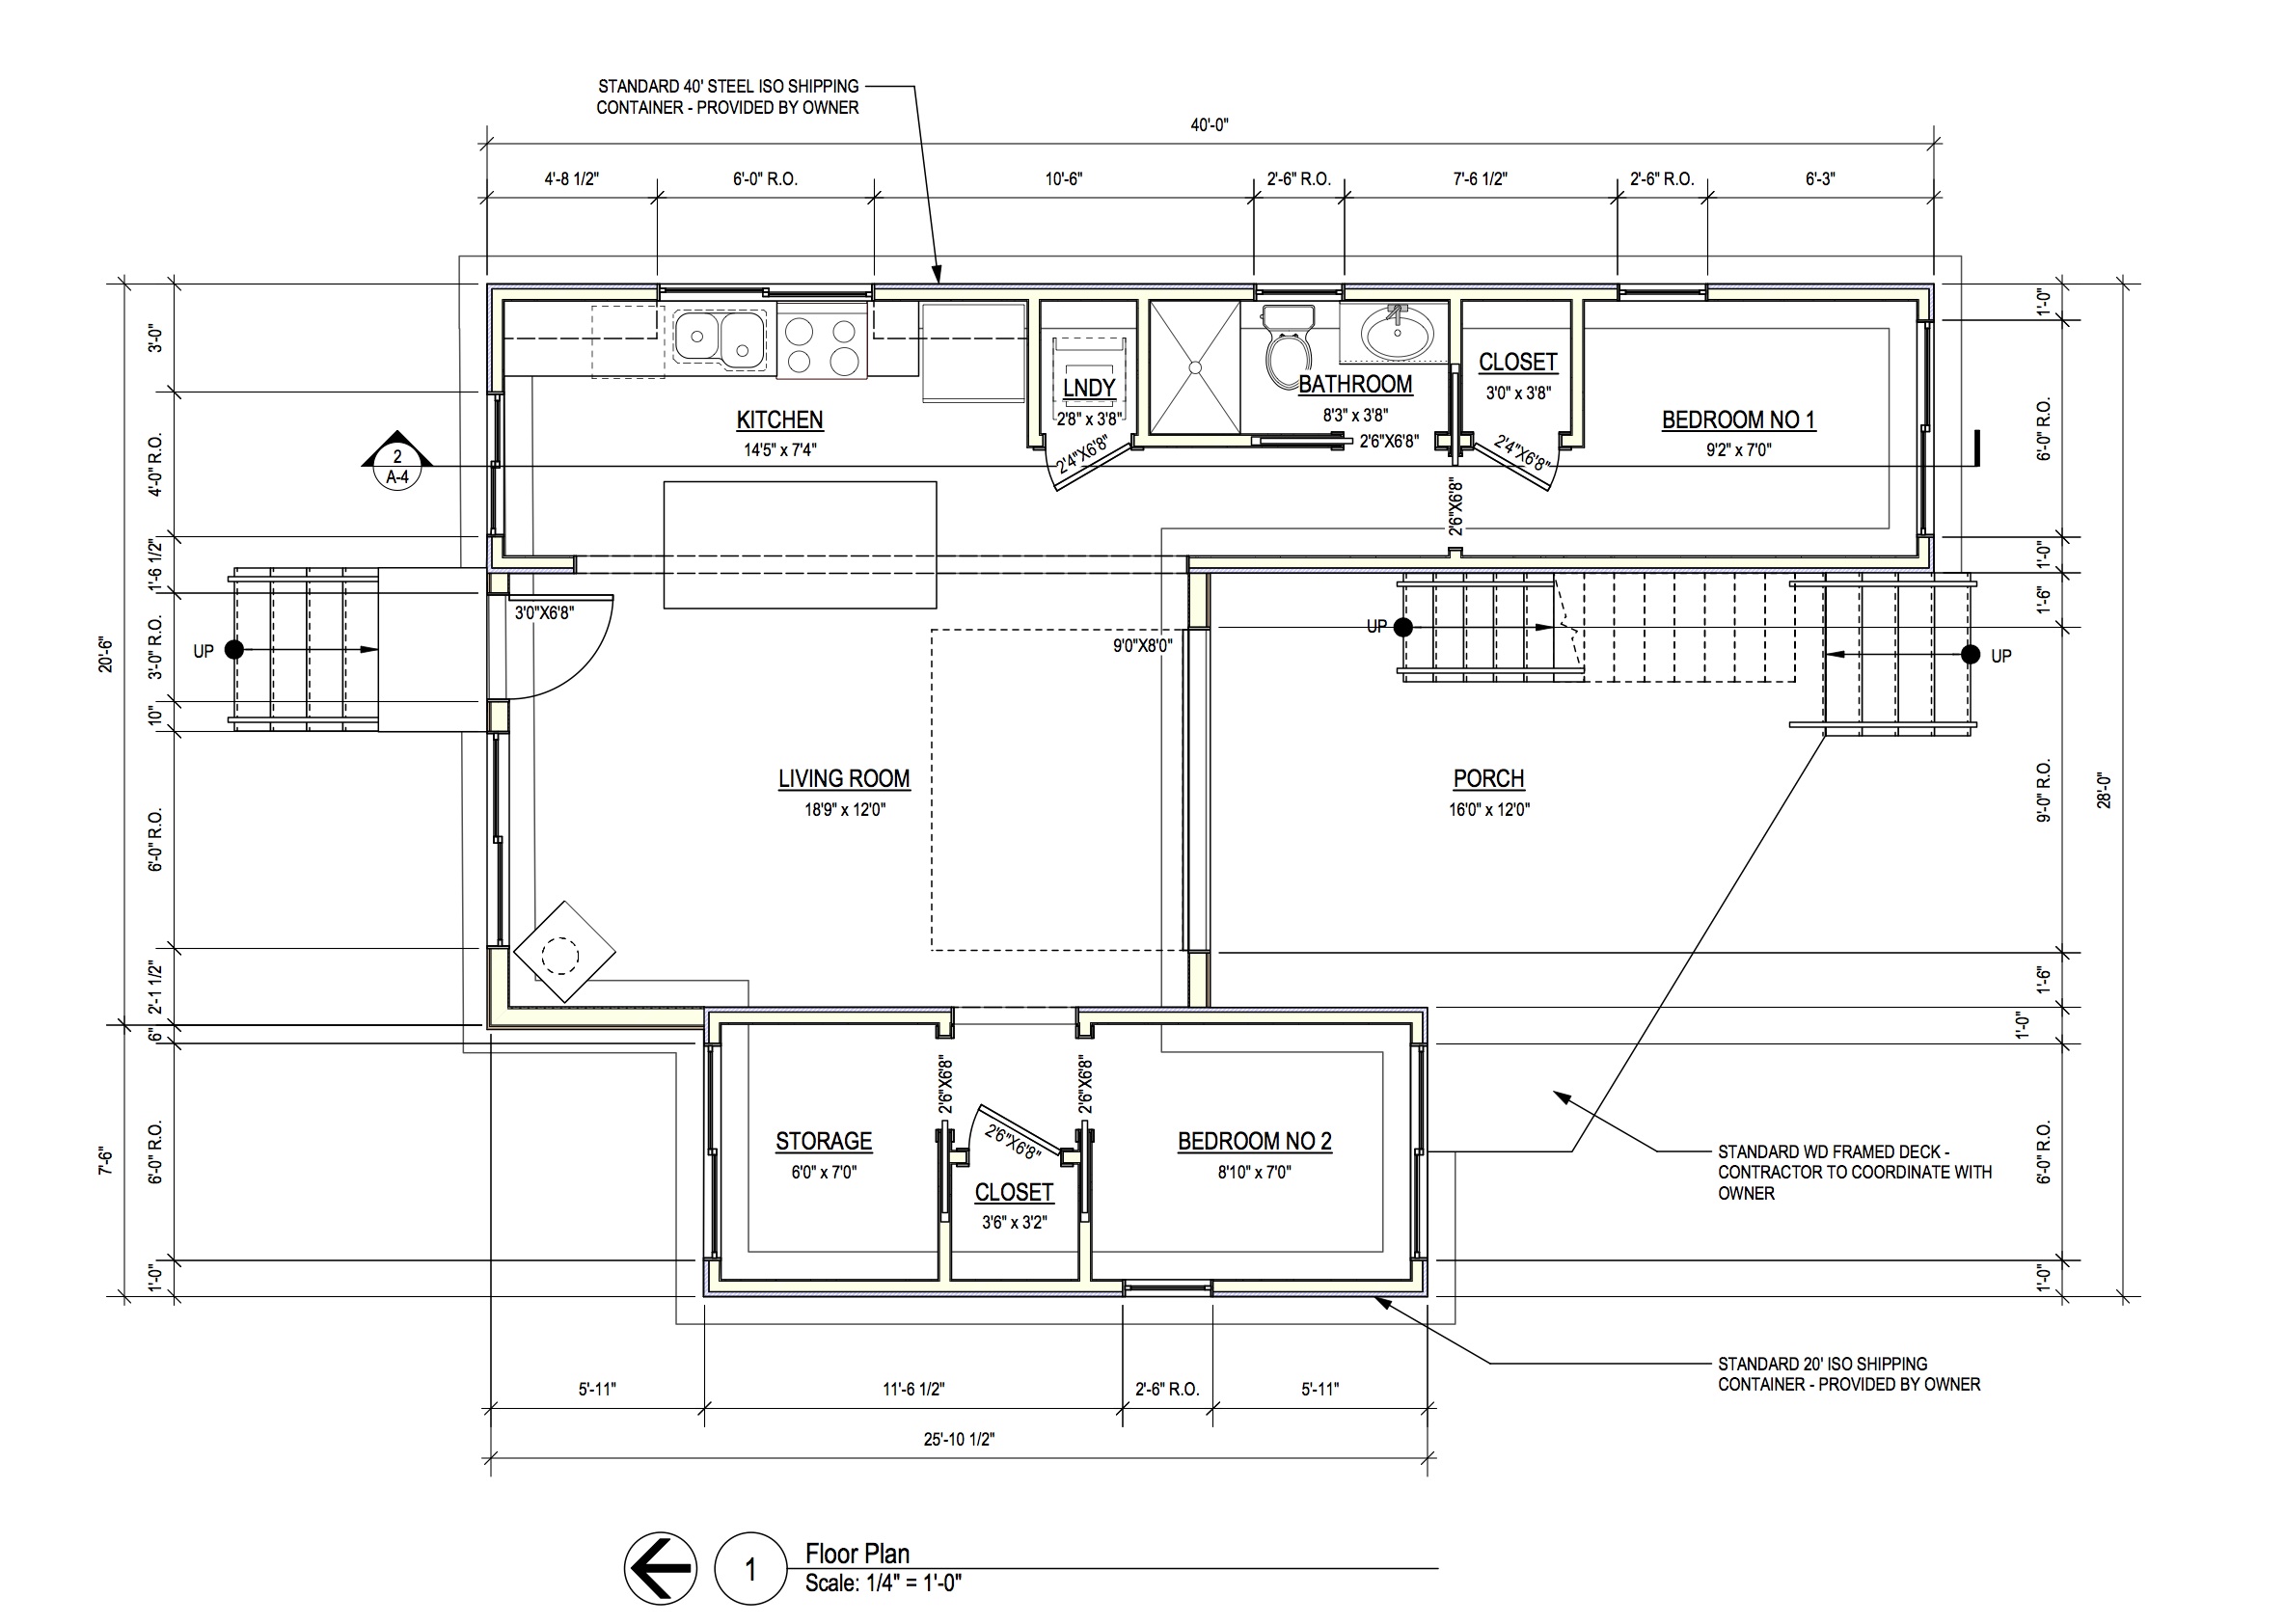 Intermodal Shipping Container Home Floor Plans. Below are